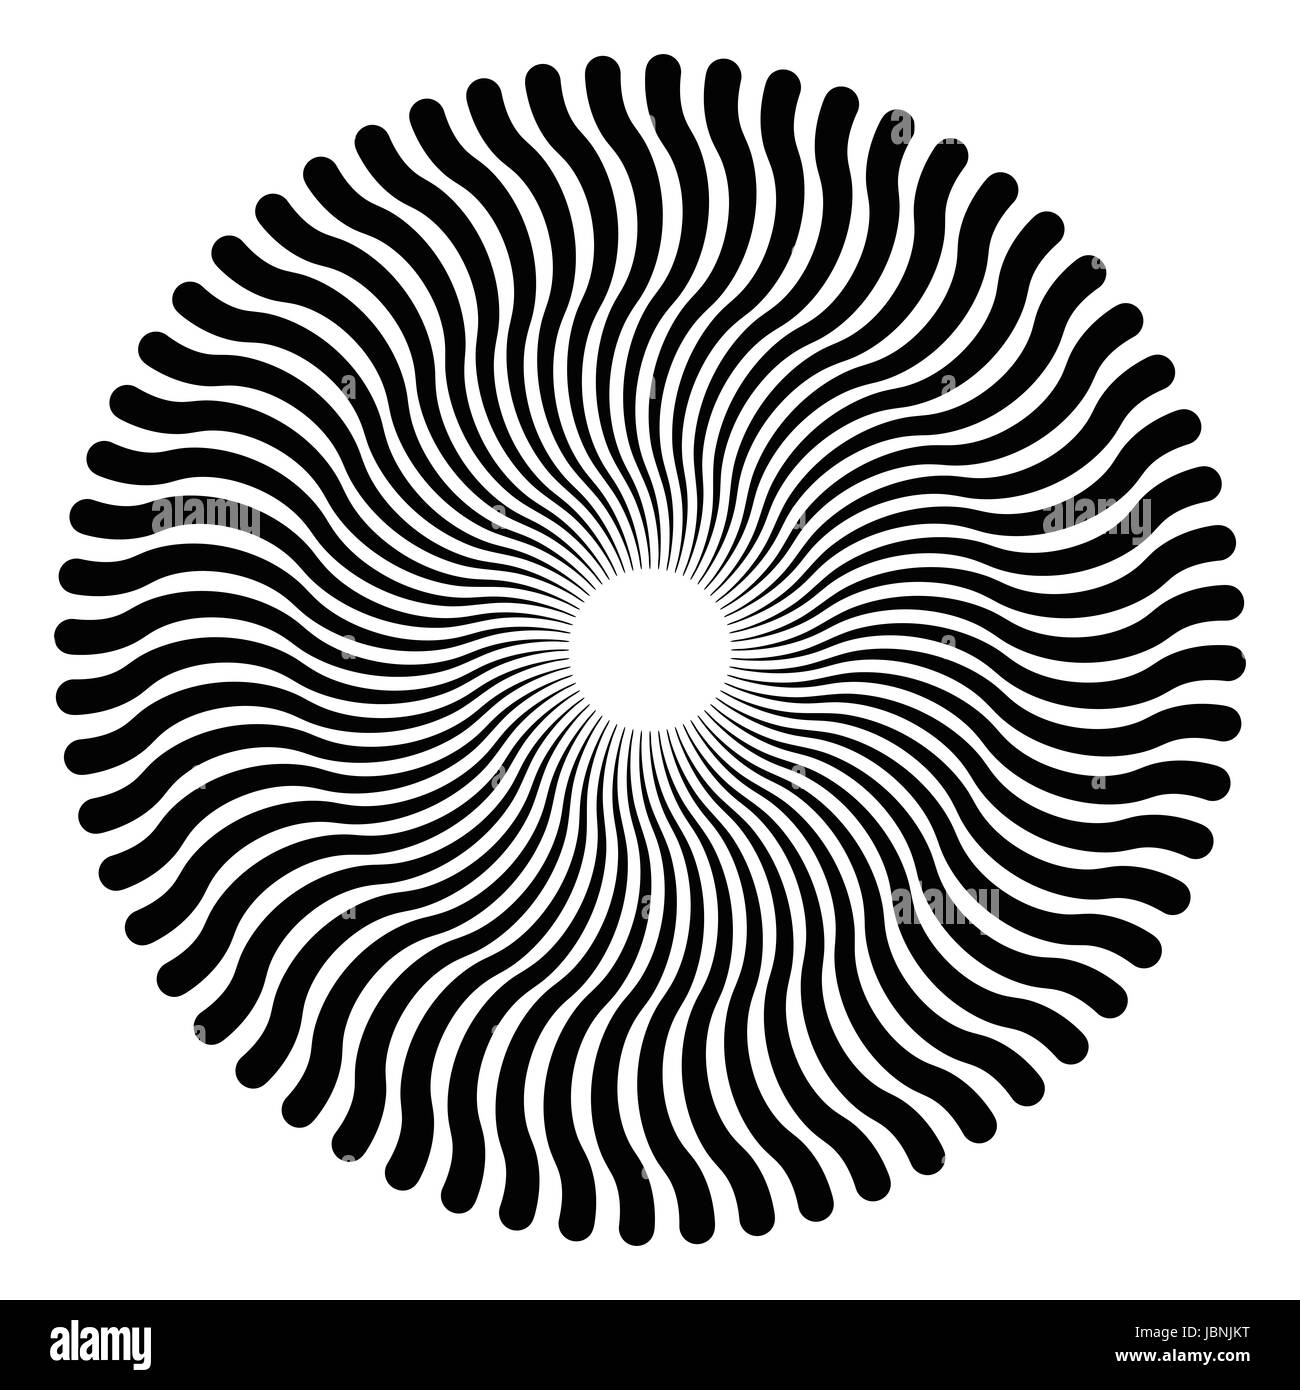 Serpentine lines forming a circular pattern and a three-dimensional effect. The pattern creates an optical illusion as if it is moving. Stock Photo